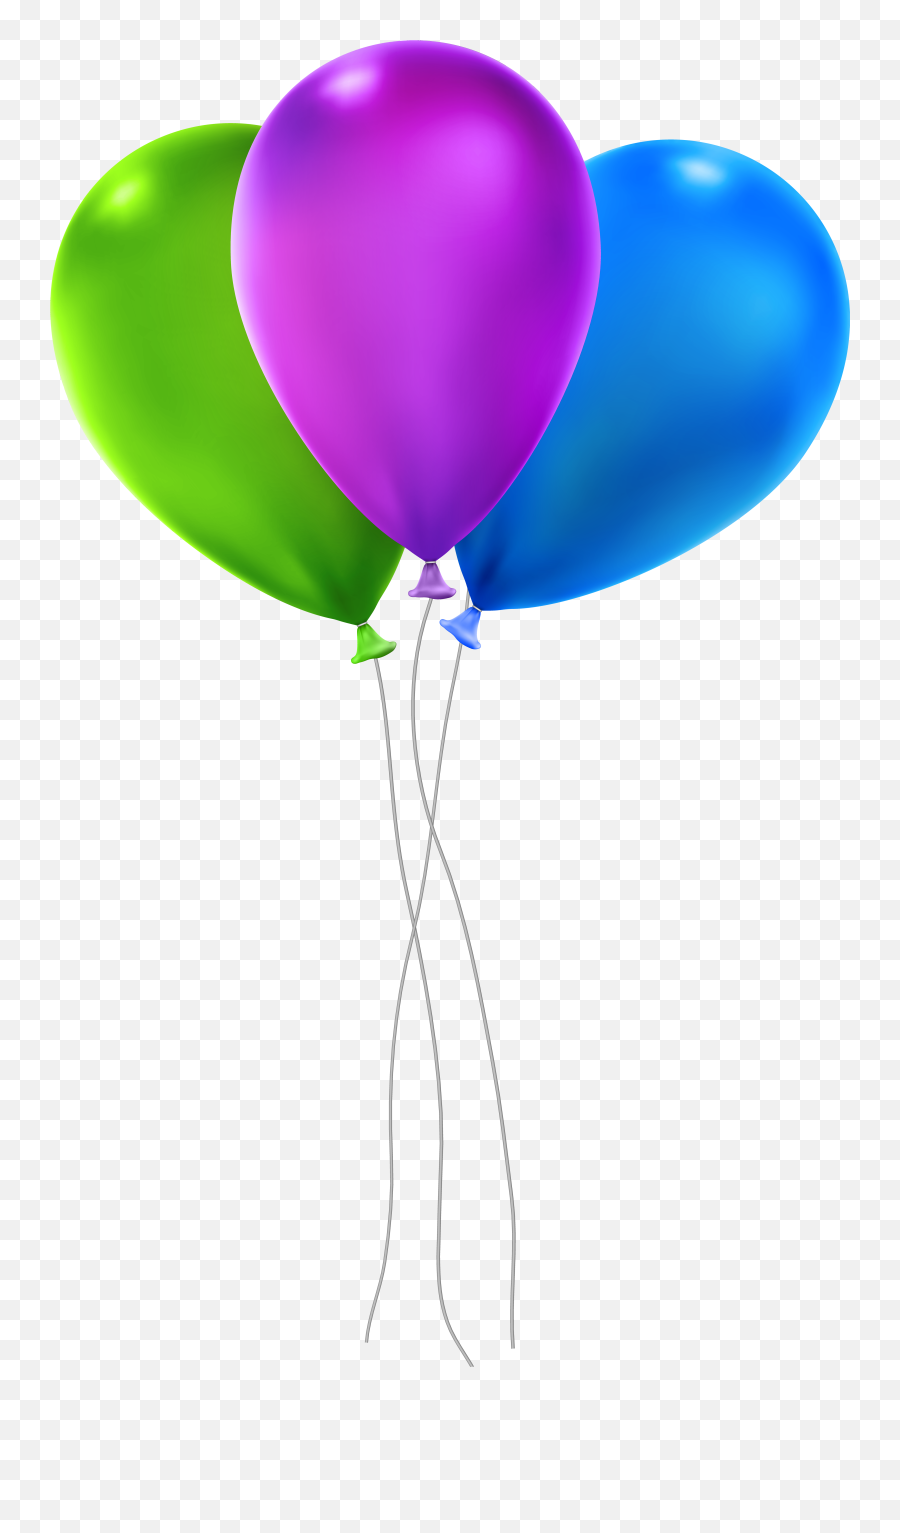 Download Balloons Clipart Image Gallery - Ballonons Violet And Green Png,Balloons Clipart Png